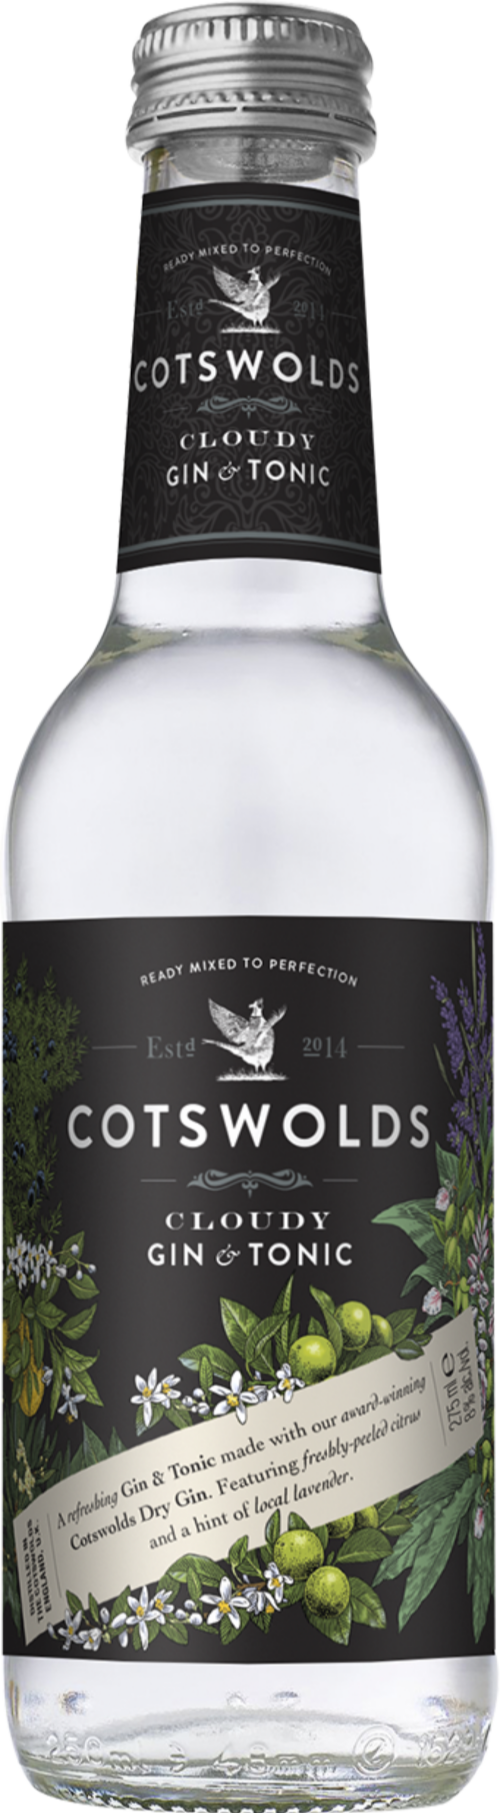 COTSWOLDS DISTILLERY Cloudy Gin & Tonic RTD 8% ABV 275ml